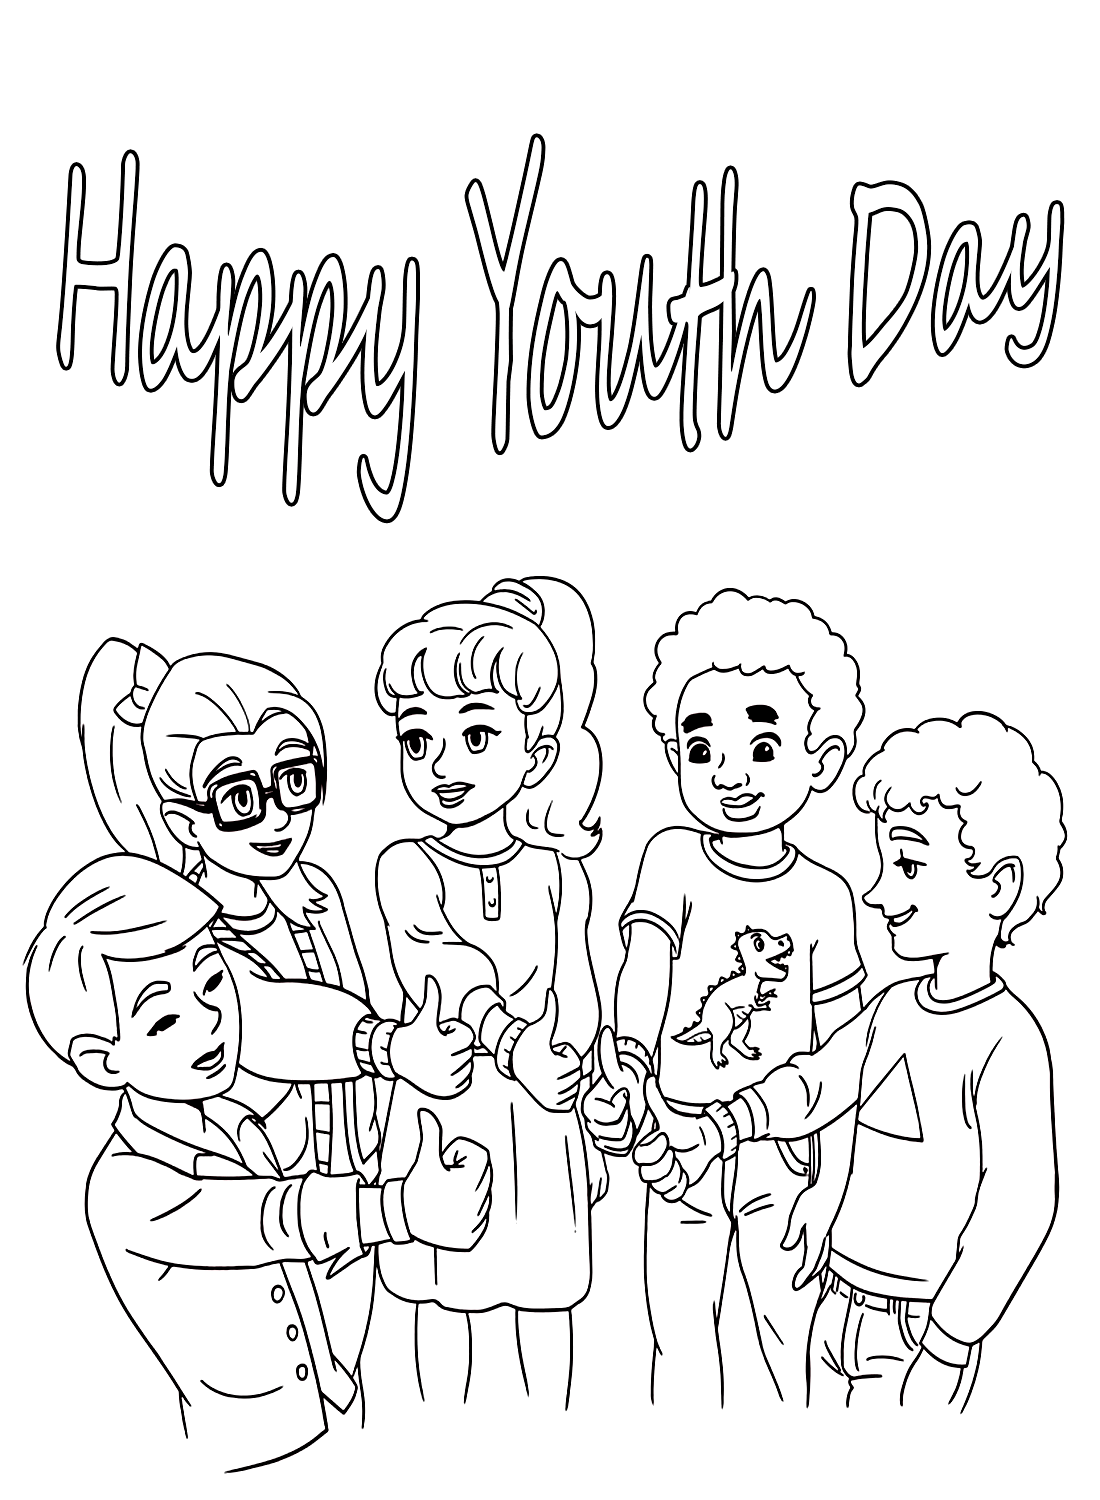 Happy Youth Day Coloring Pages from International Youth Day